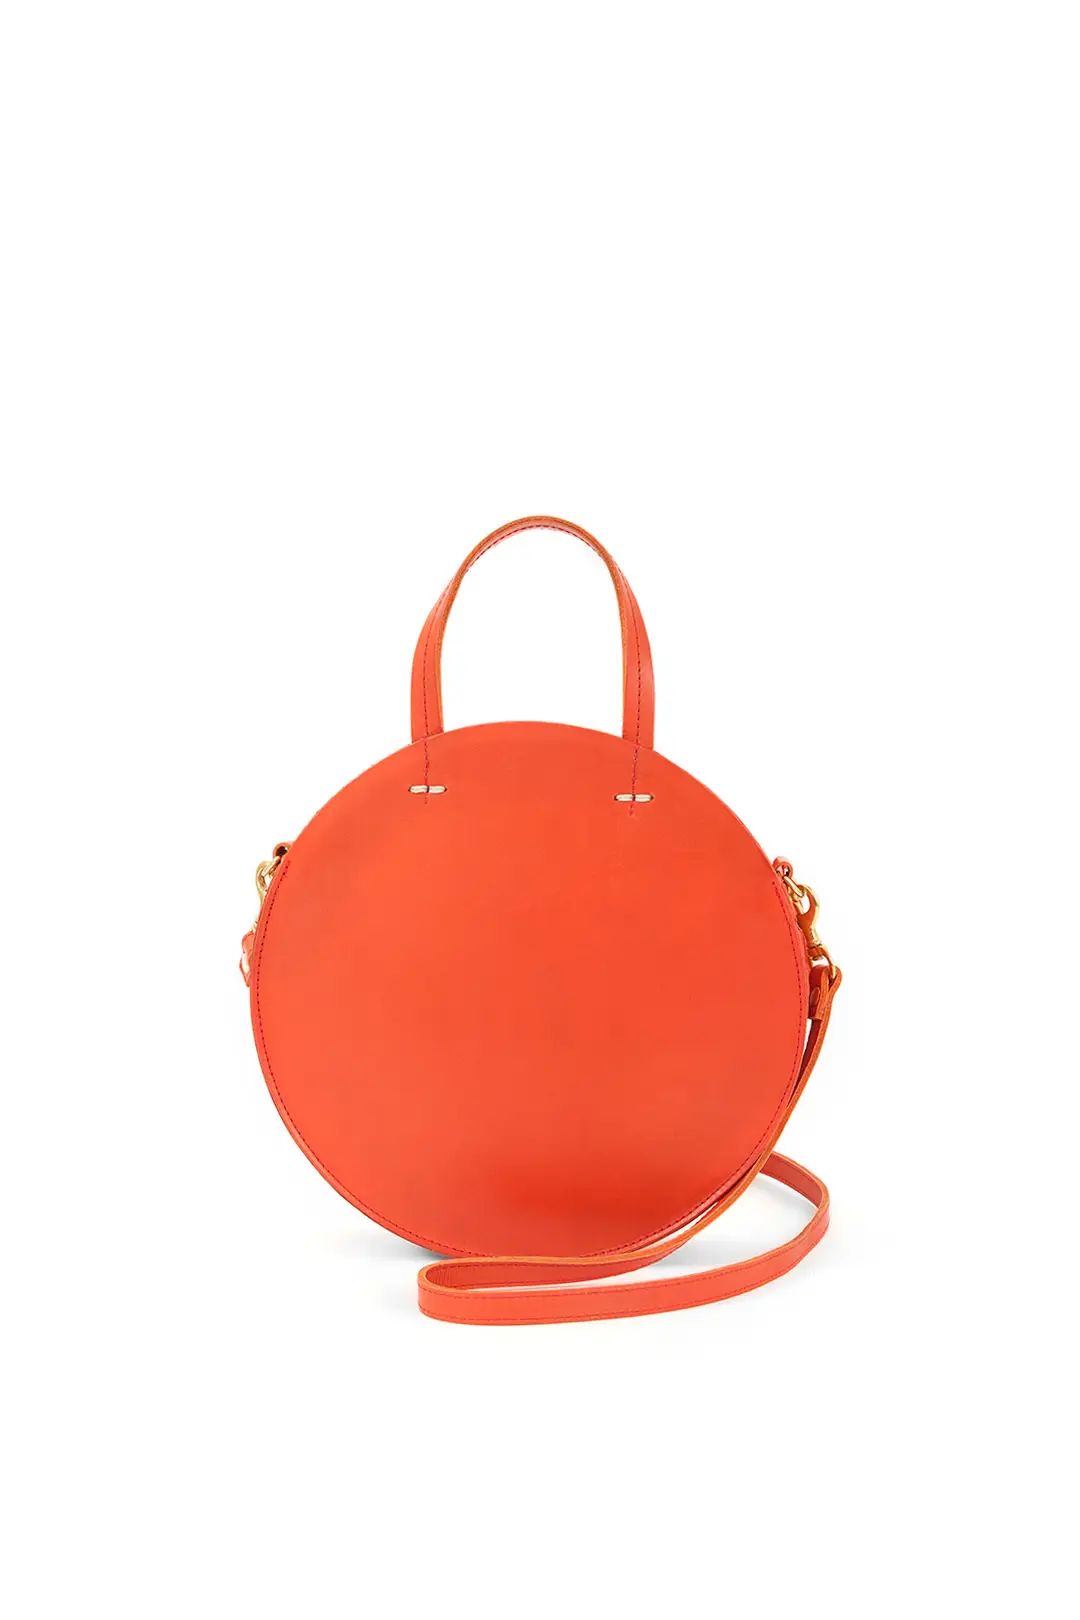 Clare V. Poppy Petit Alistair Bag | Rent The Runway